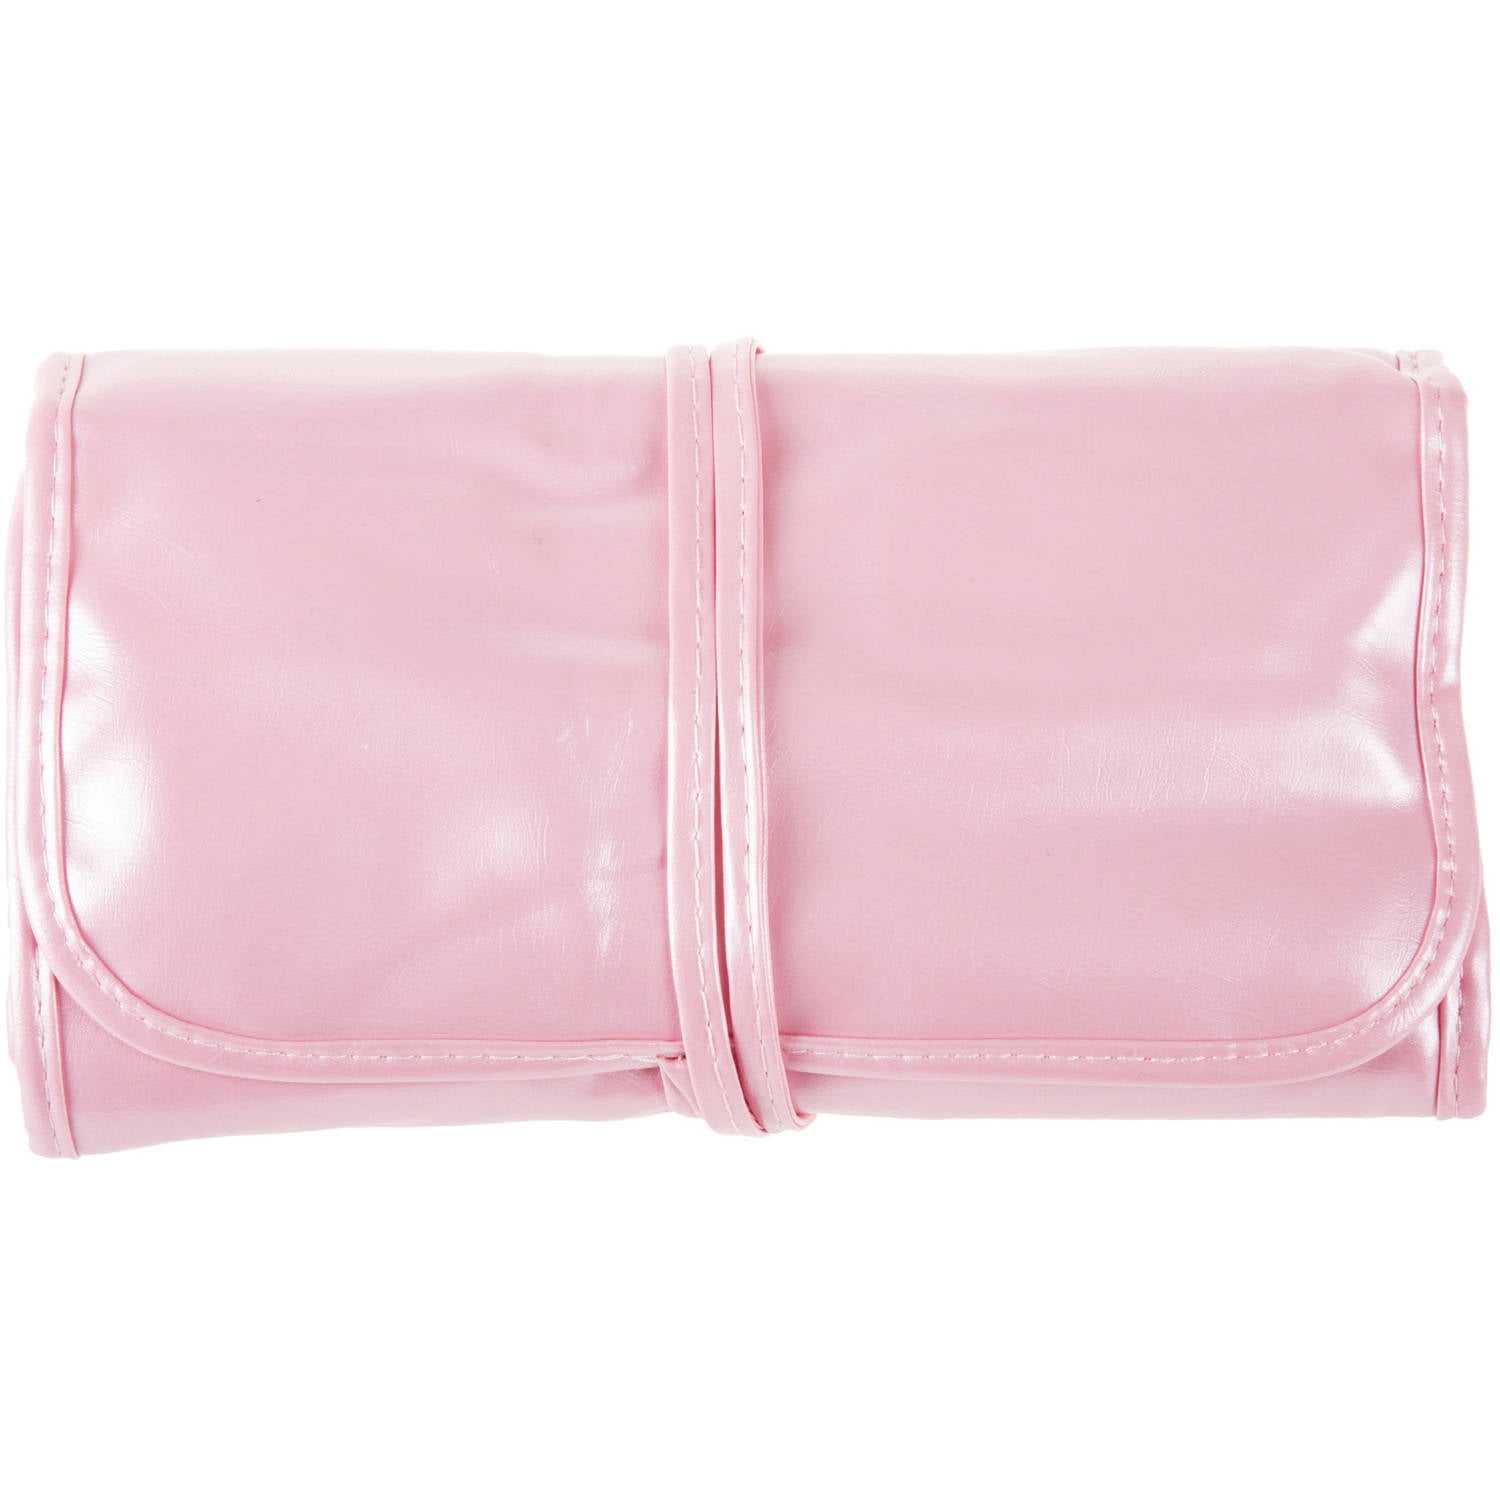 Deluxe Leather Cosmetic Nail Brush Holder - Pink - Each (610337)